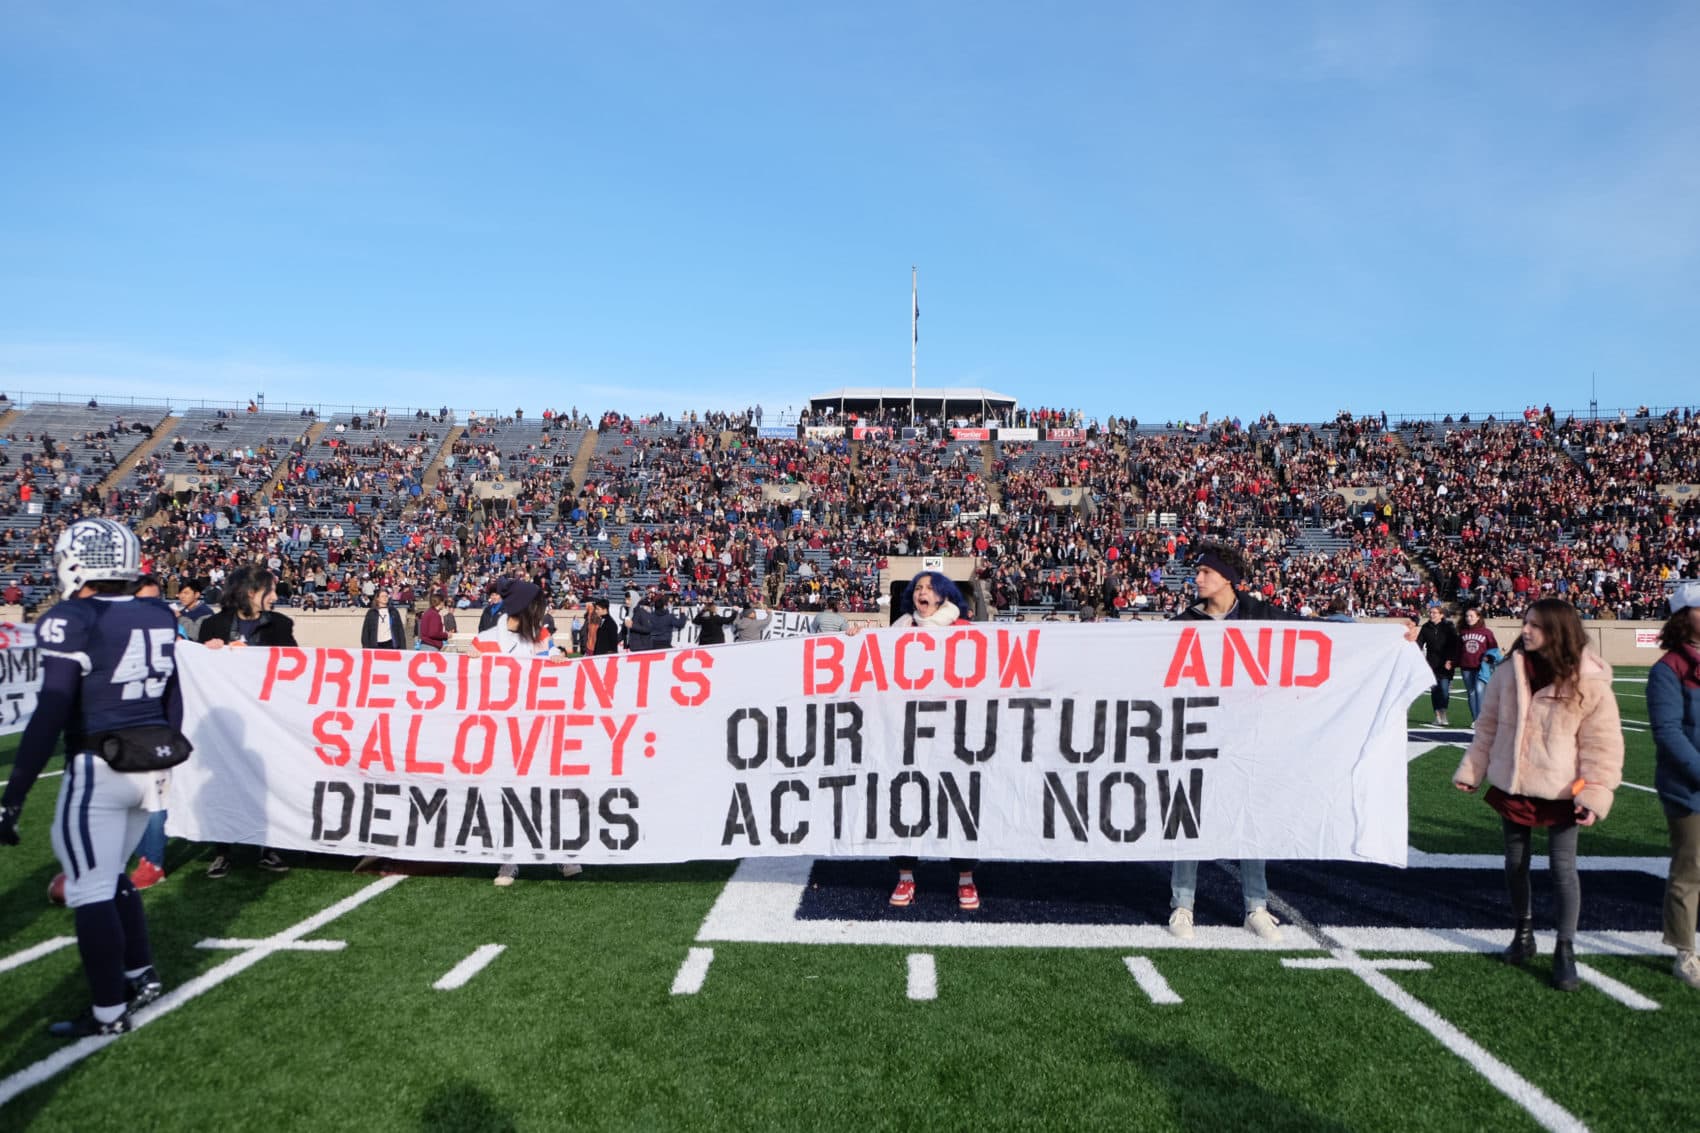 Hundreds of students and alumni protested investments in fossil fuels during the Harvard-Yale football game on Nov. 23, 2019. (Courtesy of Fossil Fuel Divest Harvard).